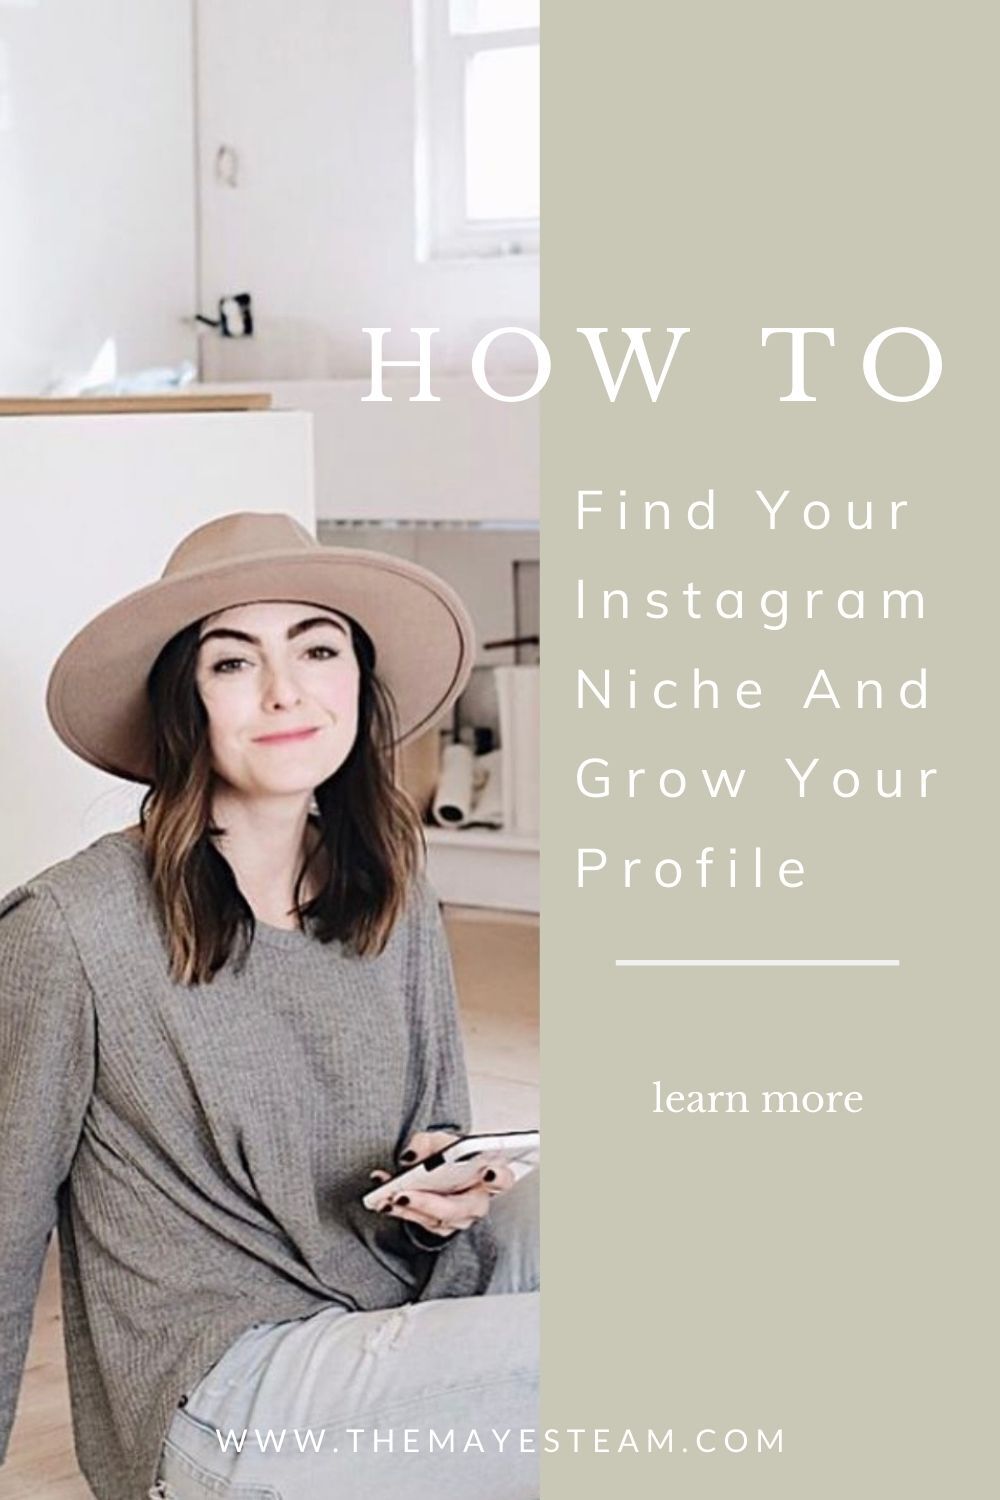 Debbie Mayes smiles about her Instagram niche while holding her iPhone. Image overlaid with text that reads How to Find Your Instagram Niche and Grow Your Profile.